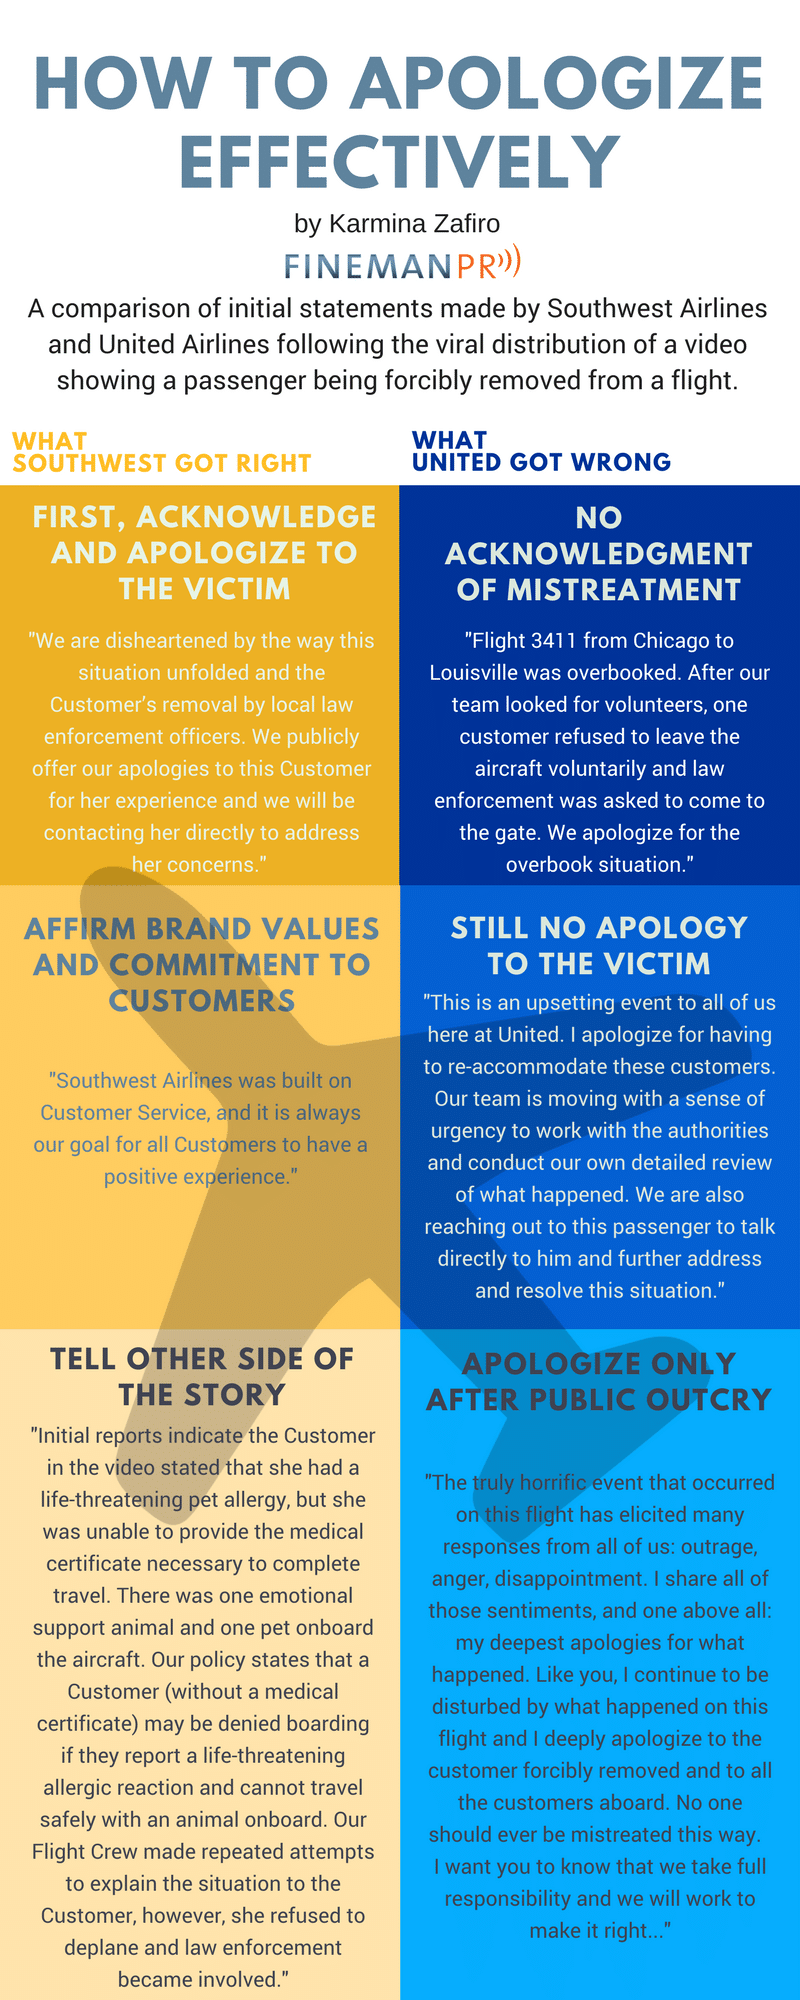 A tale of two apologies: Southwest vs. United